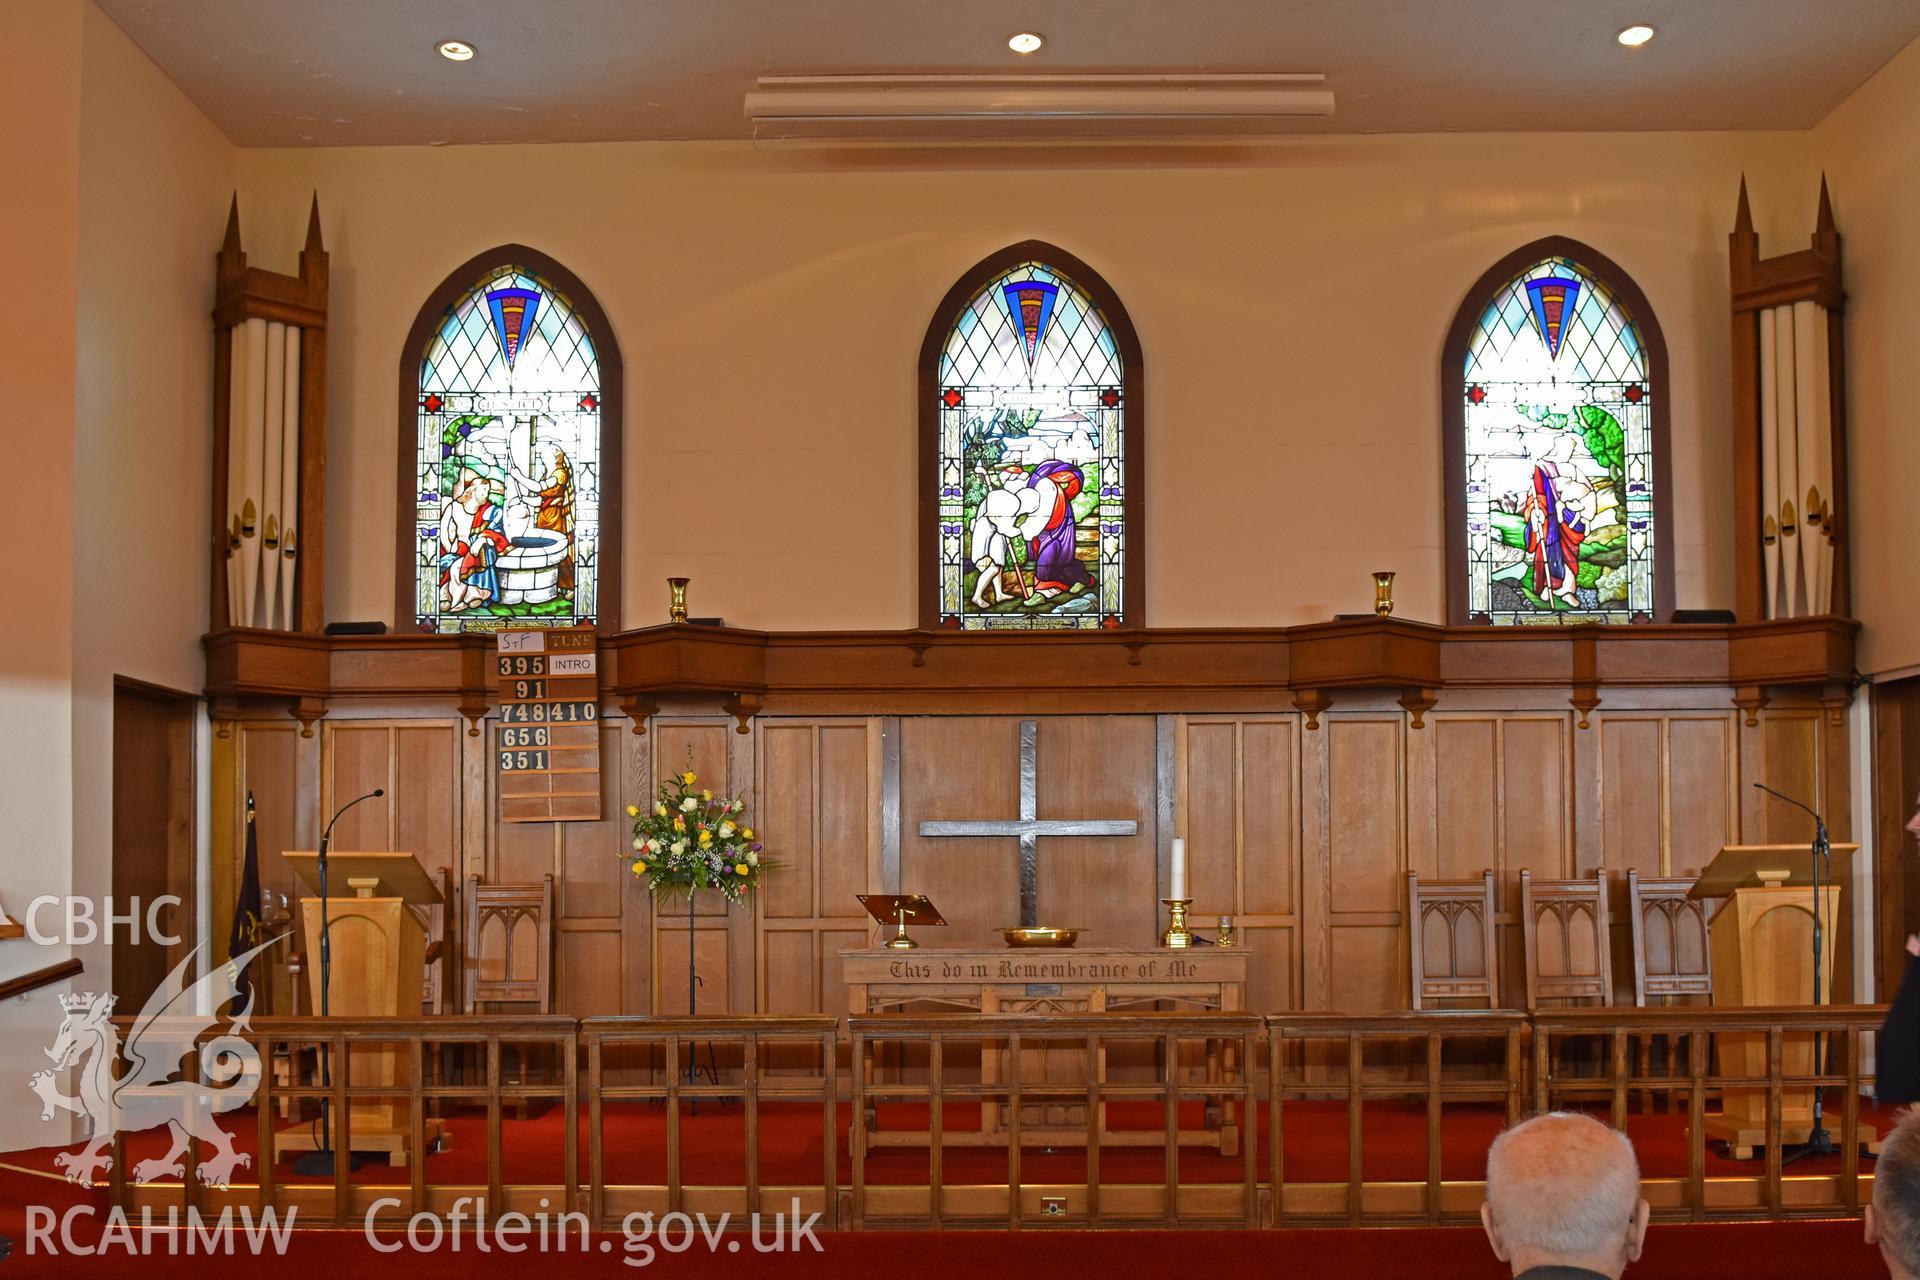 Colour photograph showing interior view looking towards the communion table at the English Wesleyan Methodist Chapel, Porthcawl, taken during photographic survey conducted by Sue Fielding on 12th May 2018.